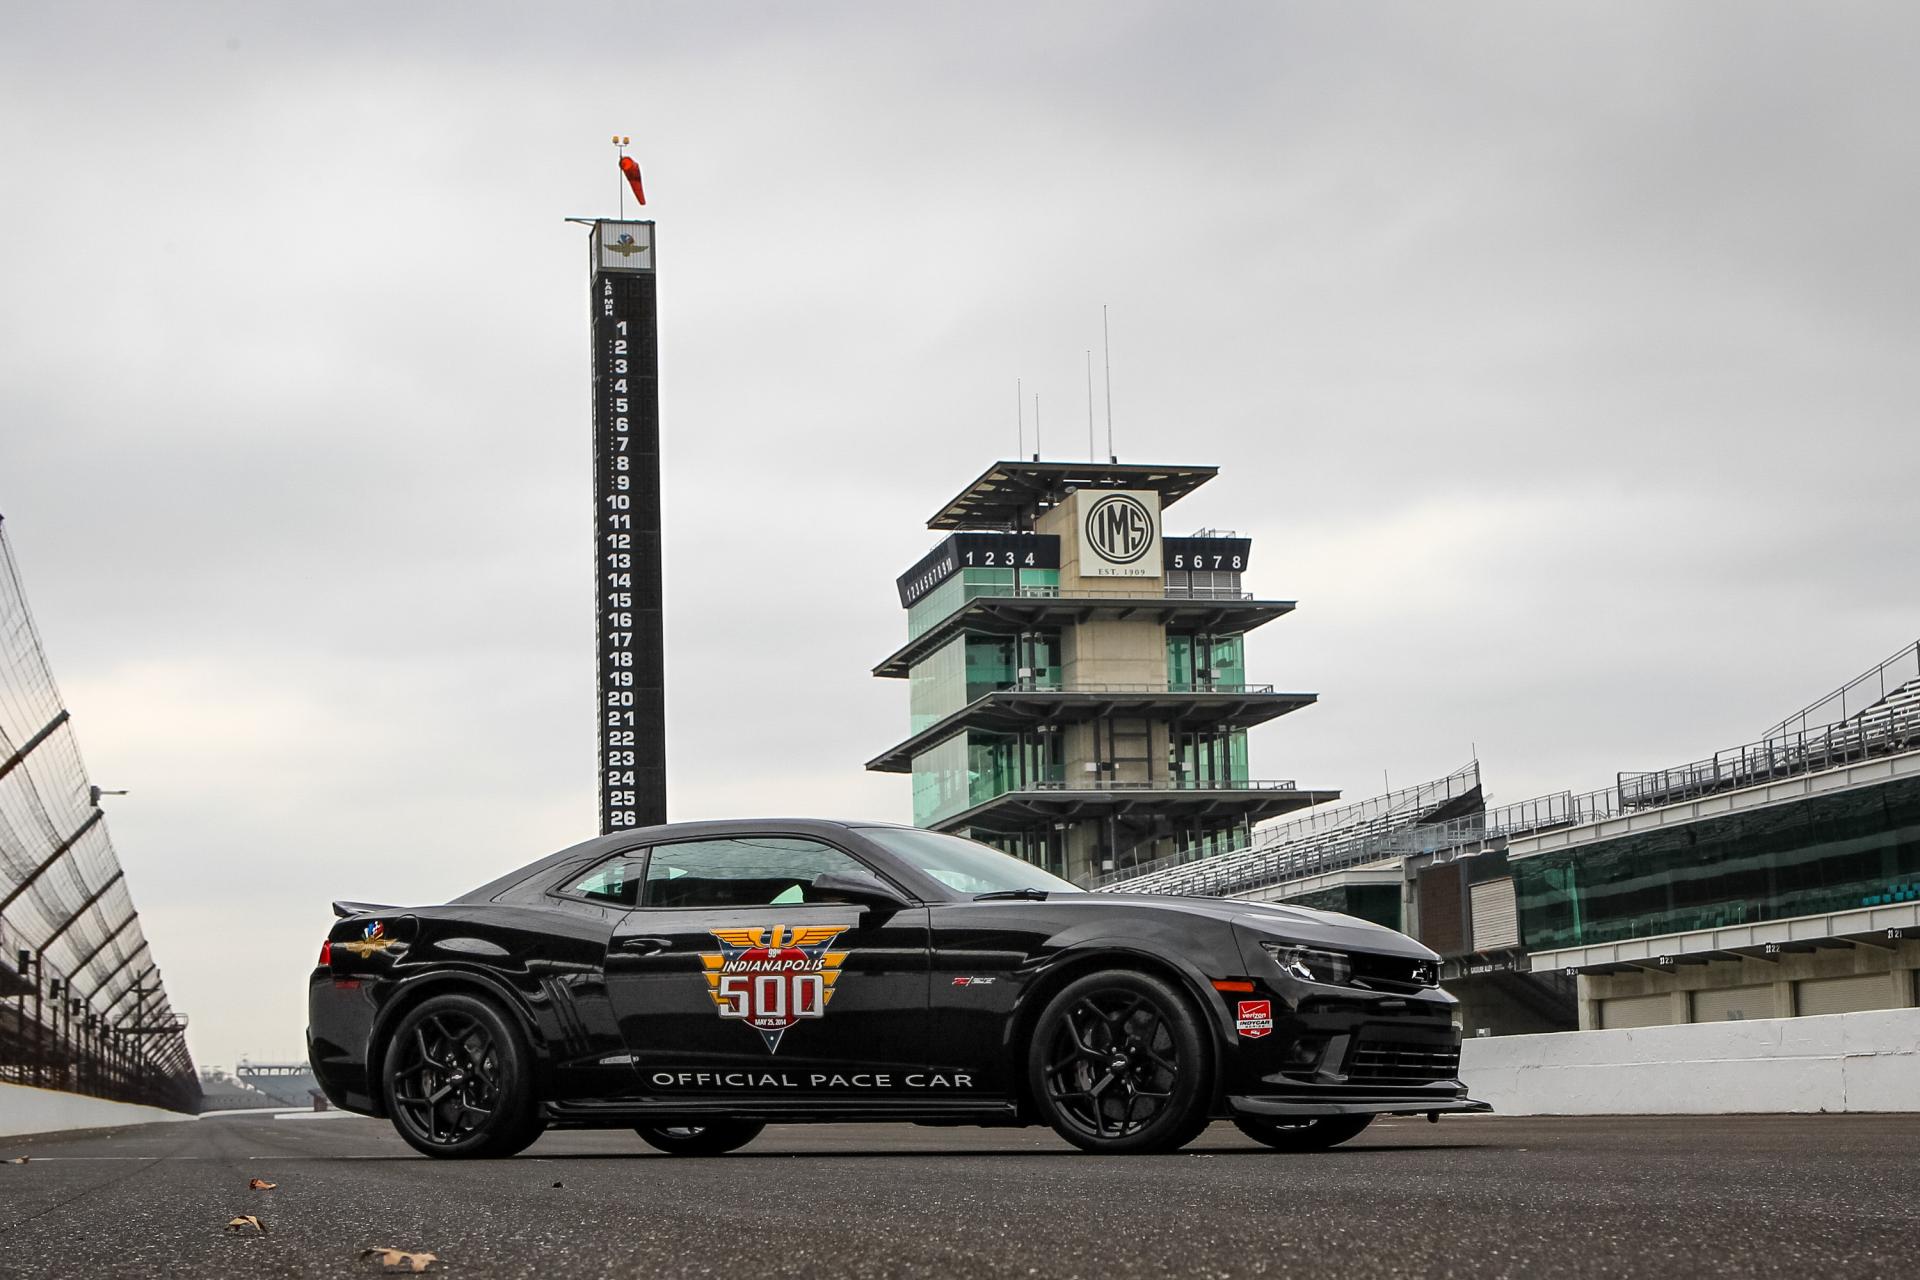 2014 Chevrolet Camaro Z28 Indy 500 Pace Car